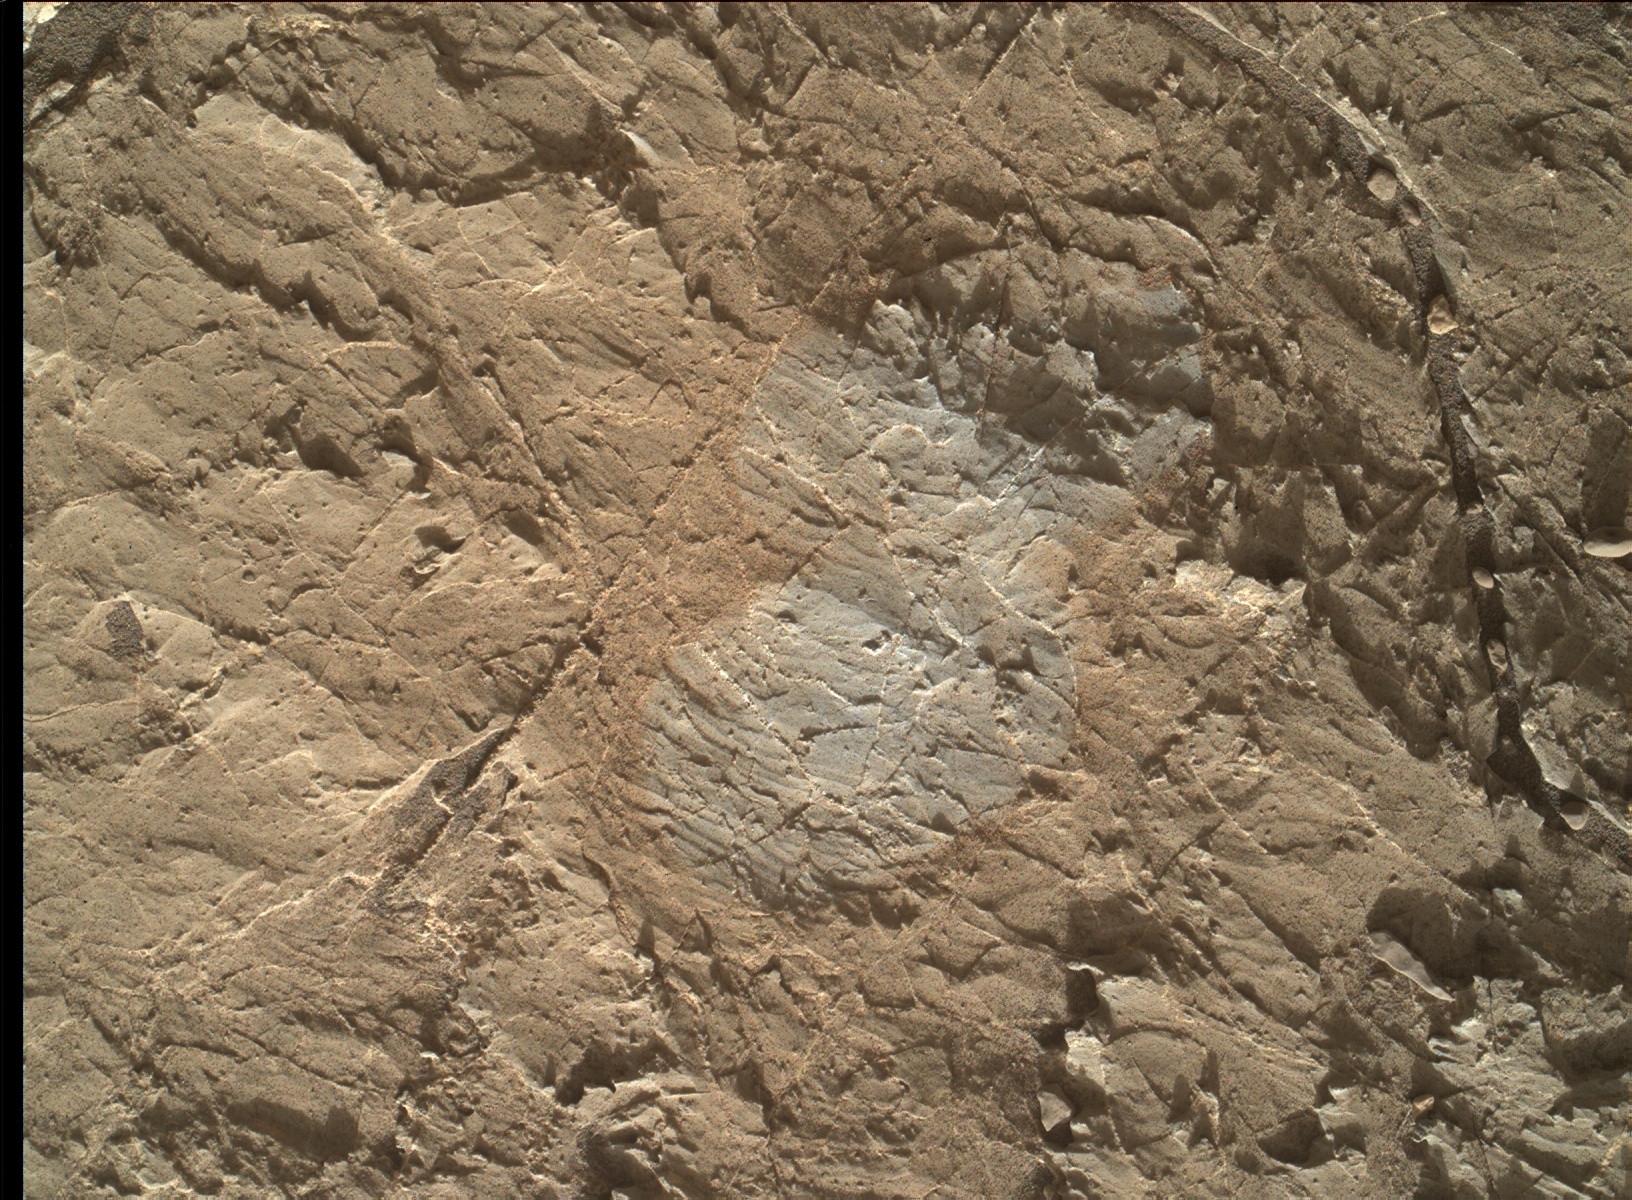 Nasa's Mars rover Curiosity acquired this image using its Mars Hand Lens Imager (MAHLI) on Sol 1973